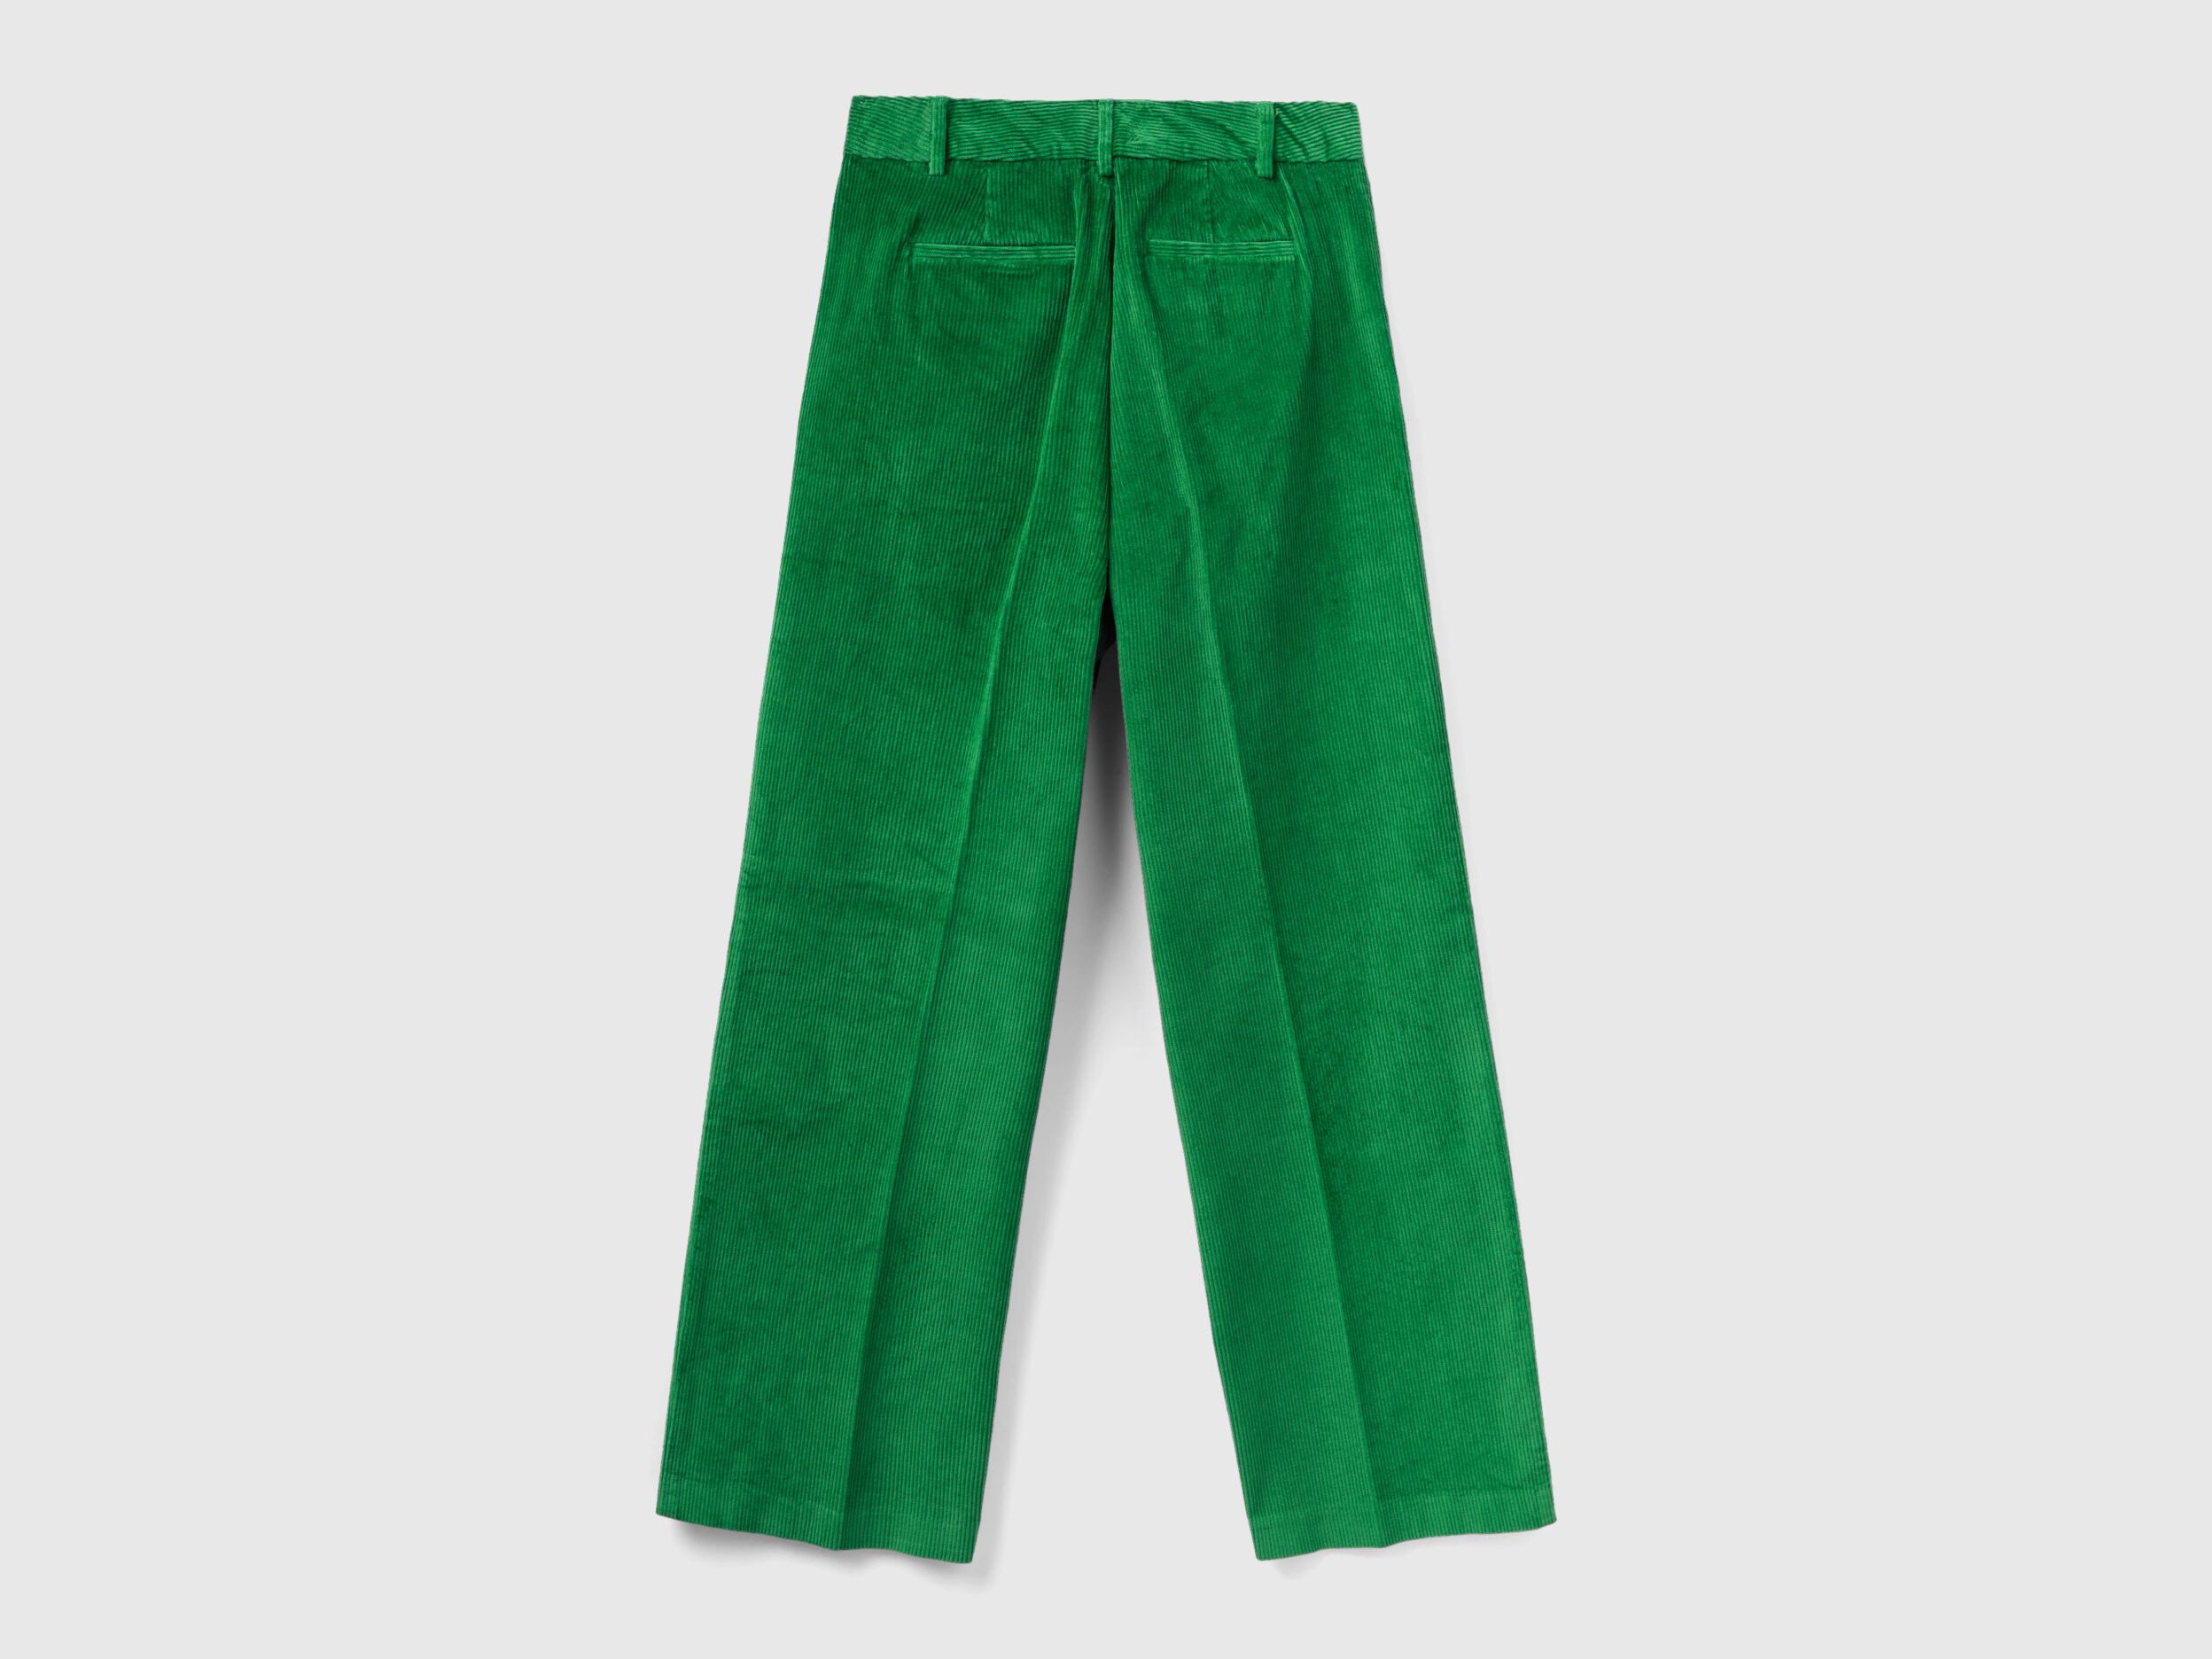 WOMENS NEW FRONTIER GREEN SUEDE TROUSERS PANTS 2 * | eBay